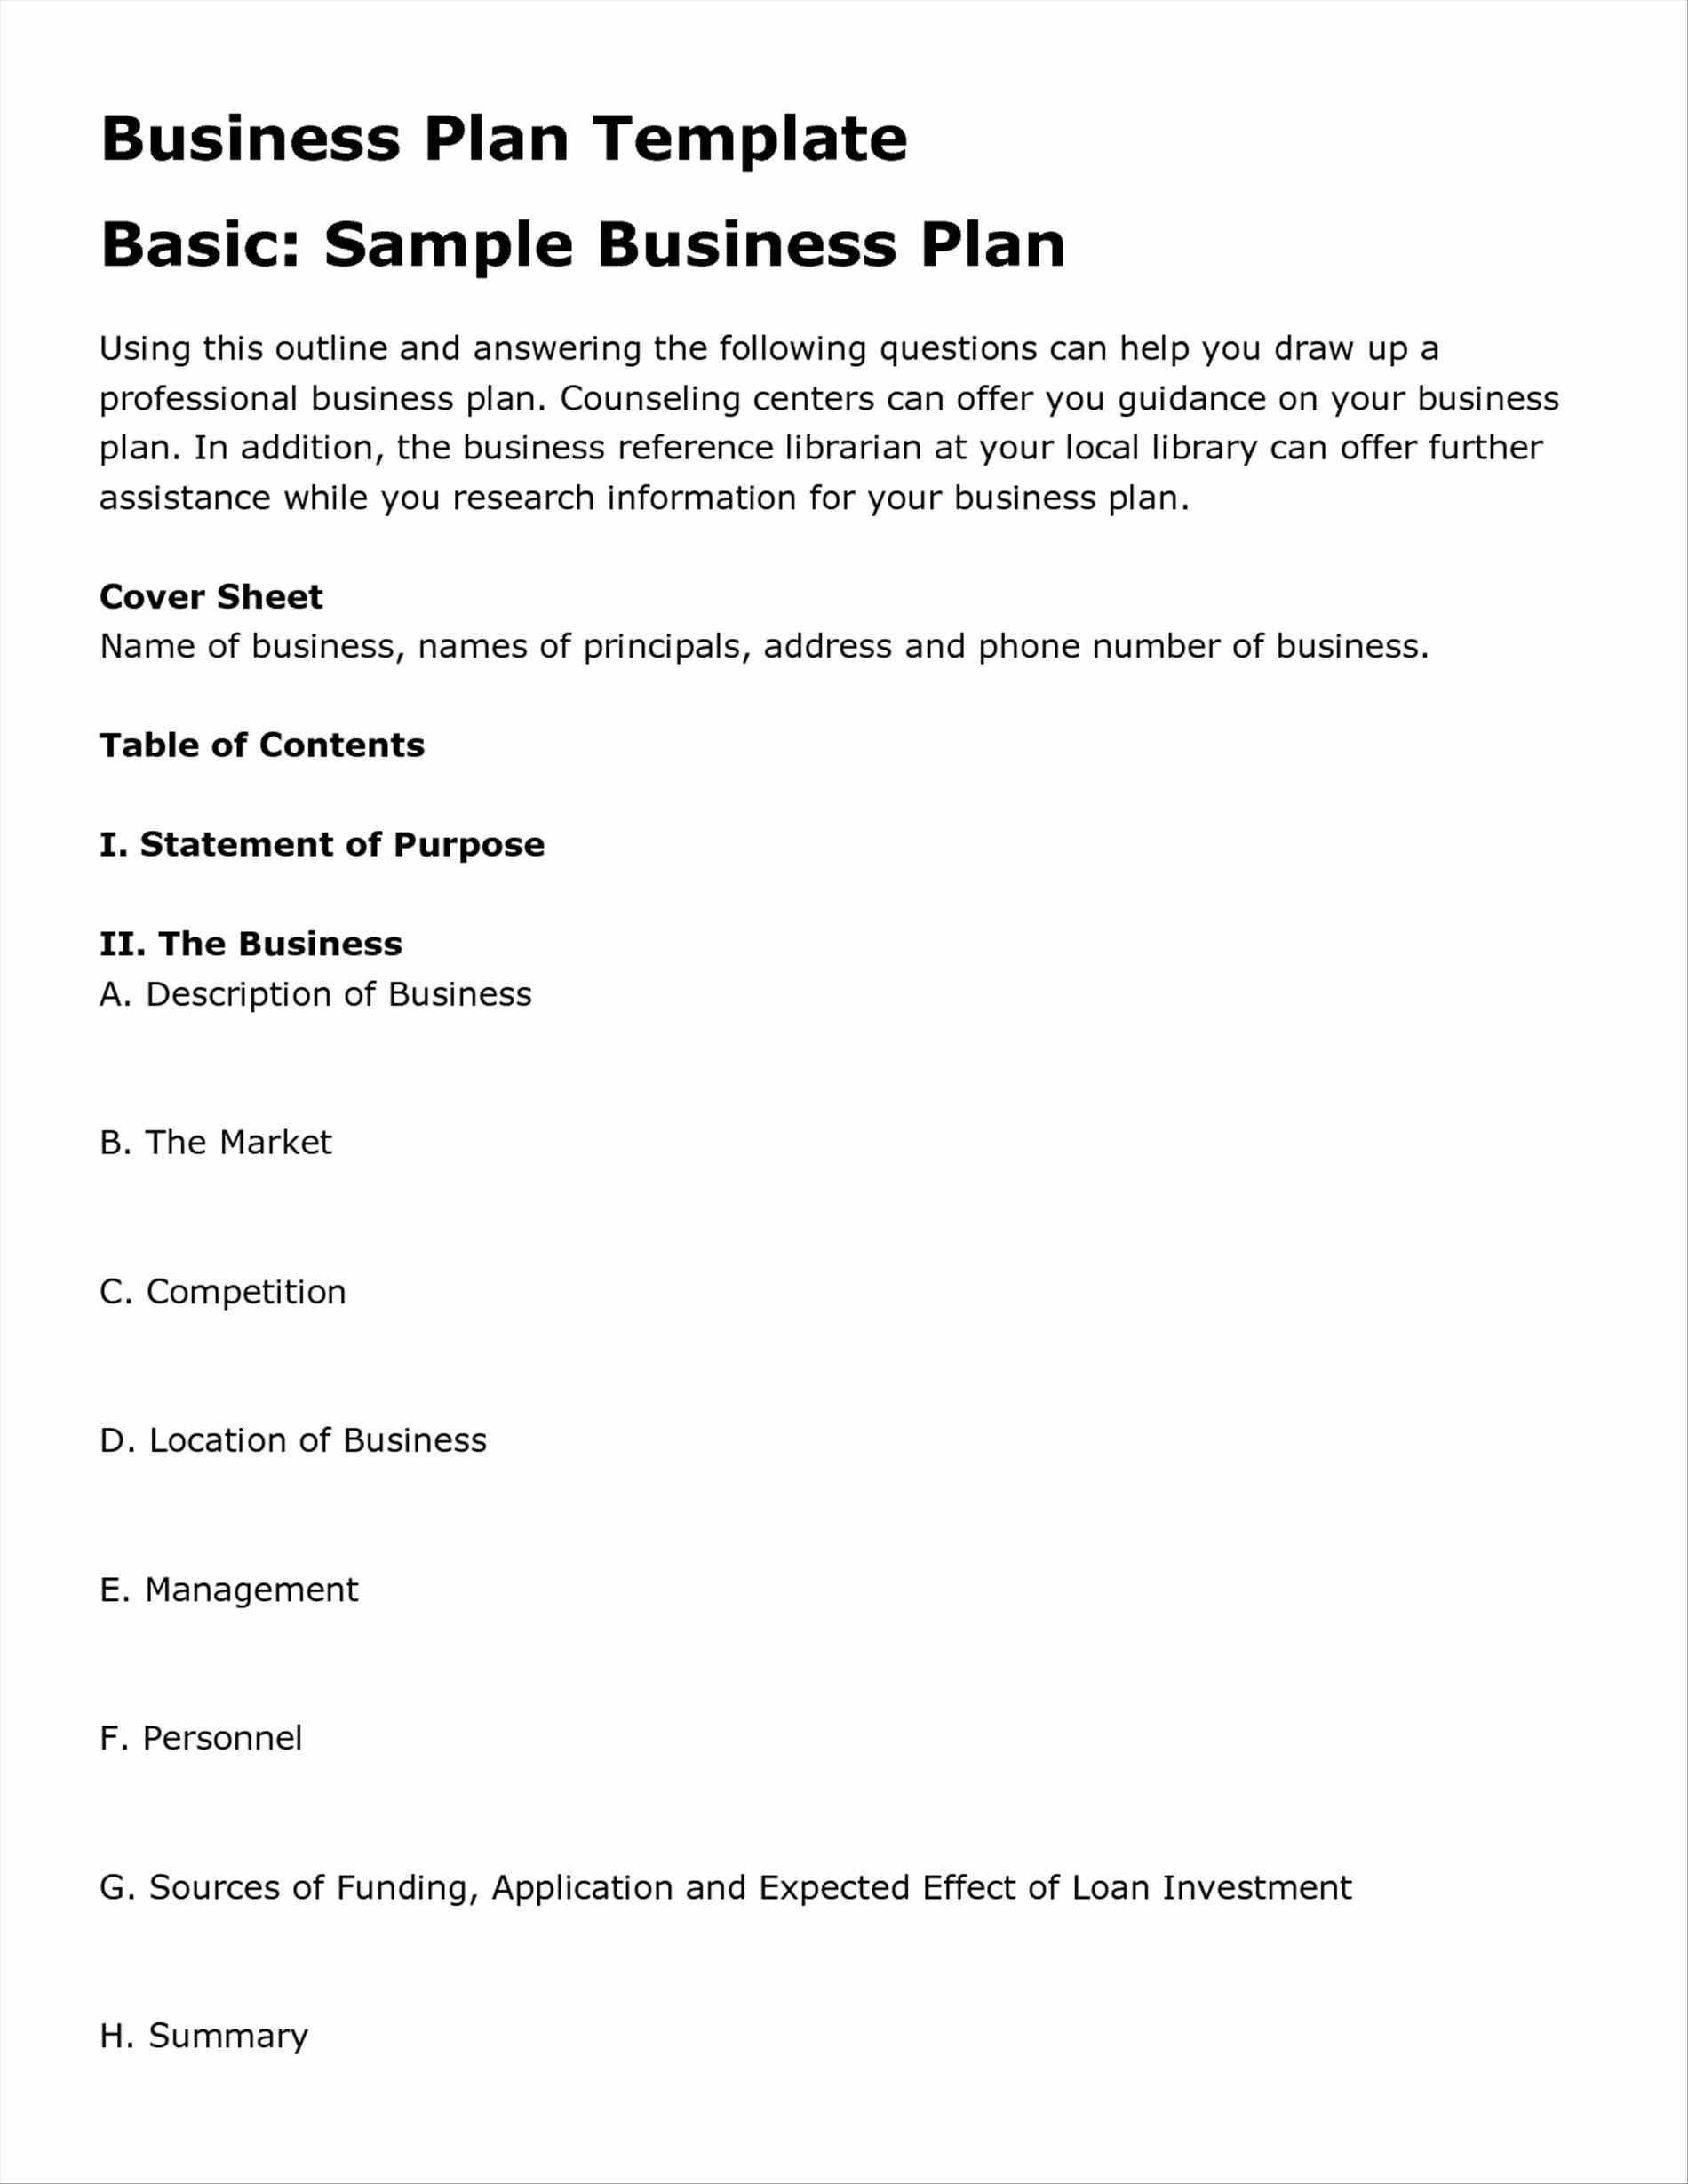 Business Plan Template Restaurant Templates In Word Excel Throughout Business Plan Template Free Word Document